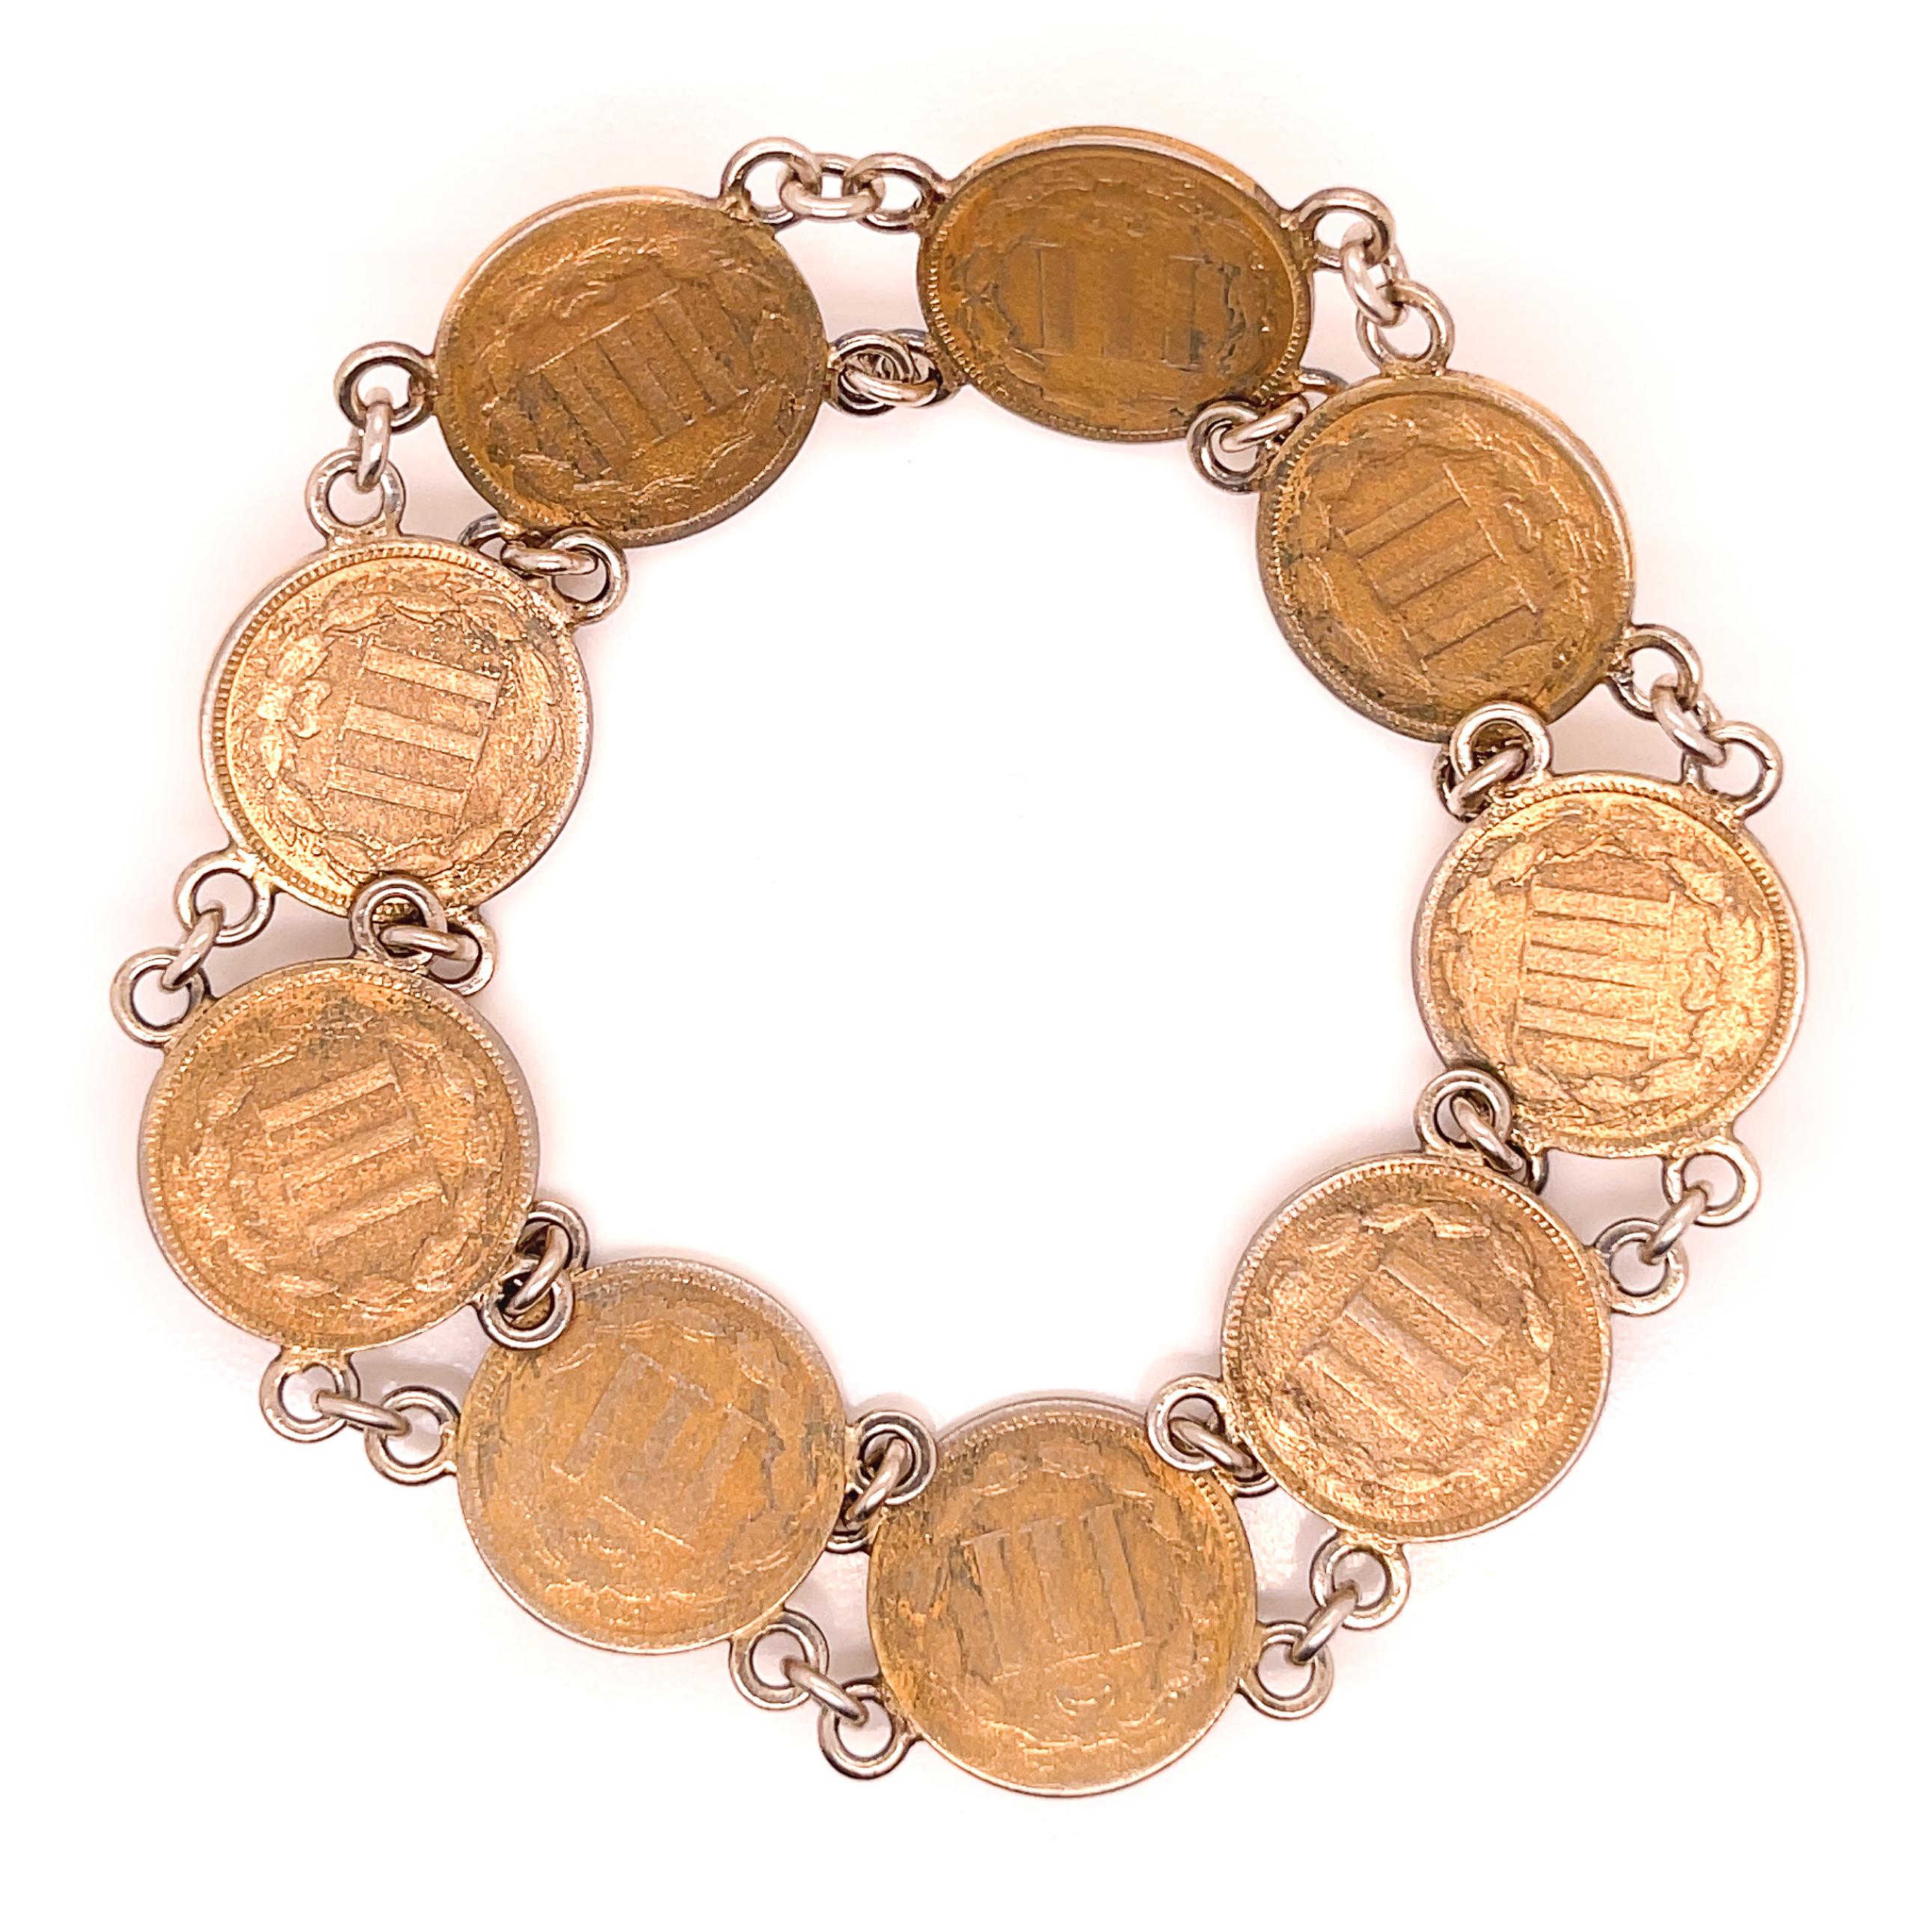 Antique Coin Bracelet with Gold Plated American 3 Cent Nickel Coins In Good Condition For Sale In Philadelphia, PA